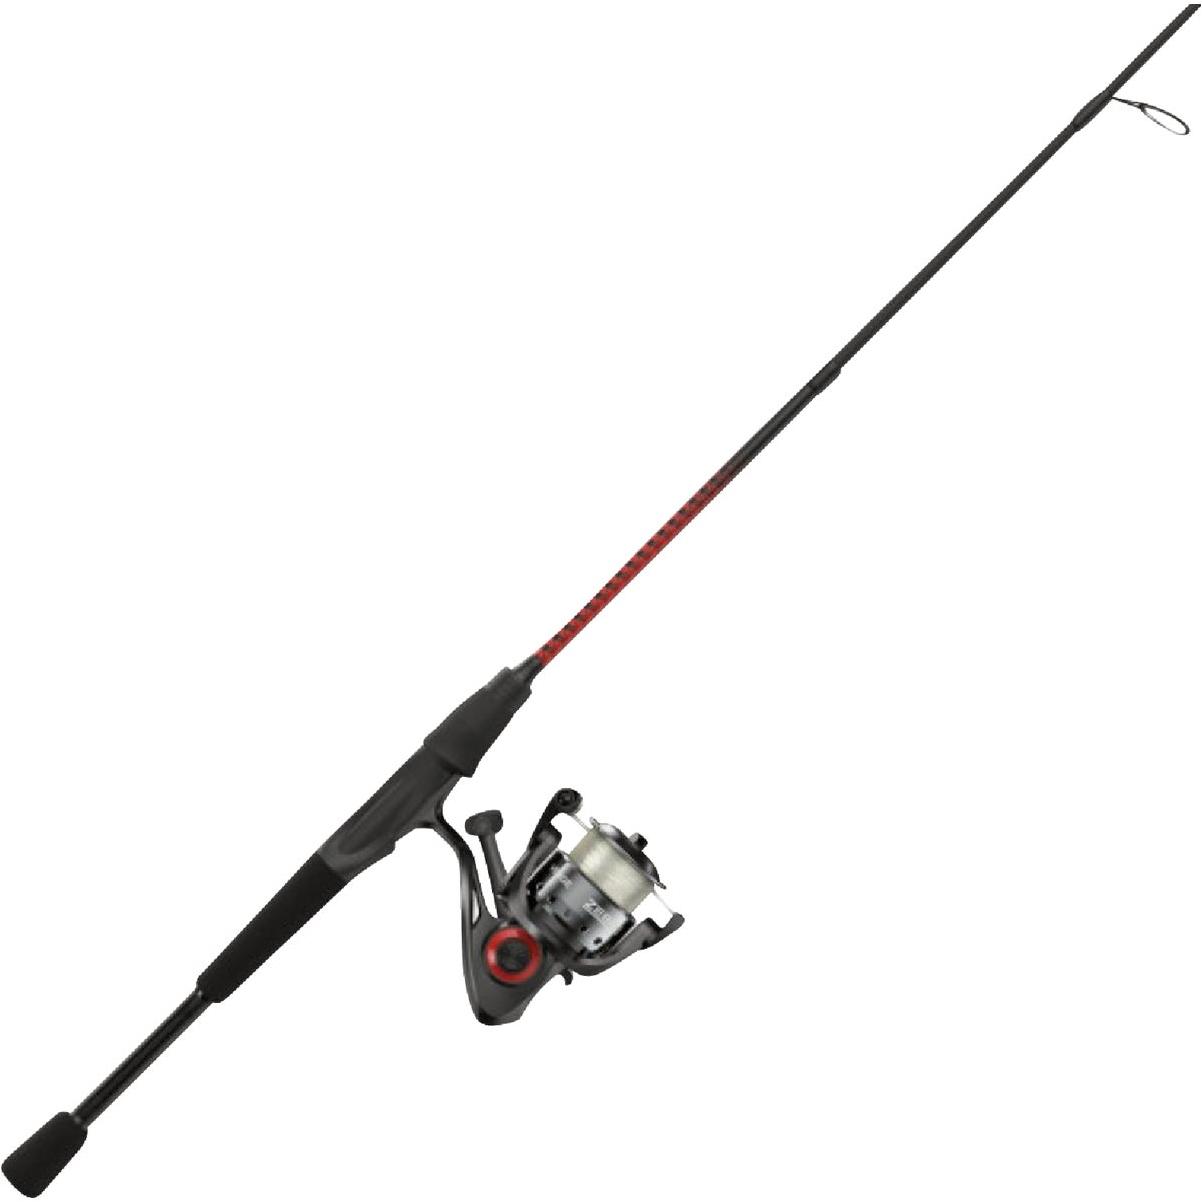 South Bend Trophy Stalker Spinning Combo, 6-Feet 6-Inch